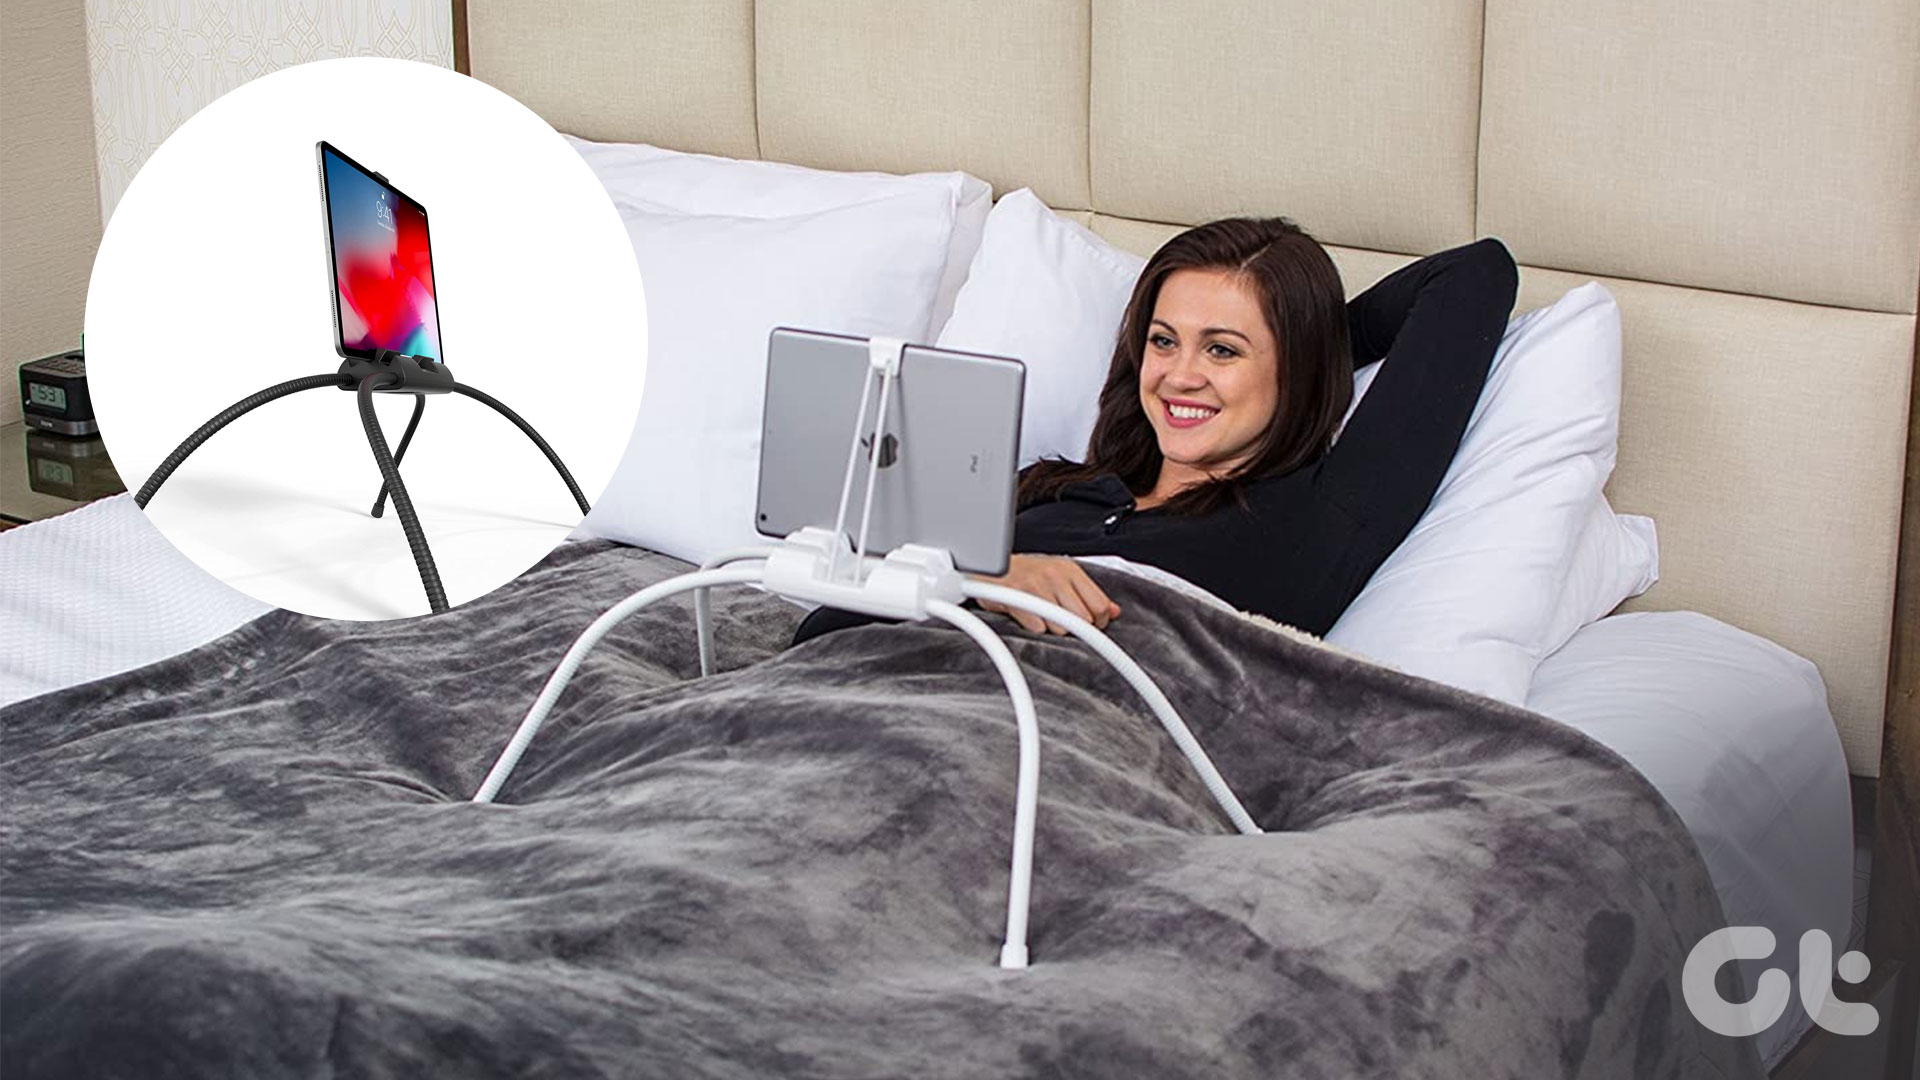 Best iPad Holders for Bed